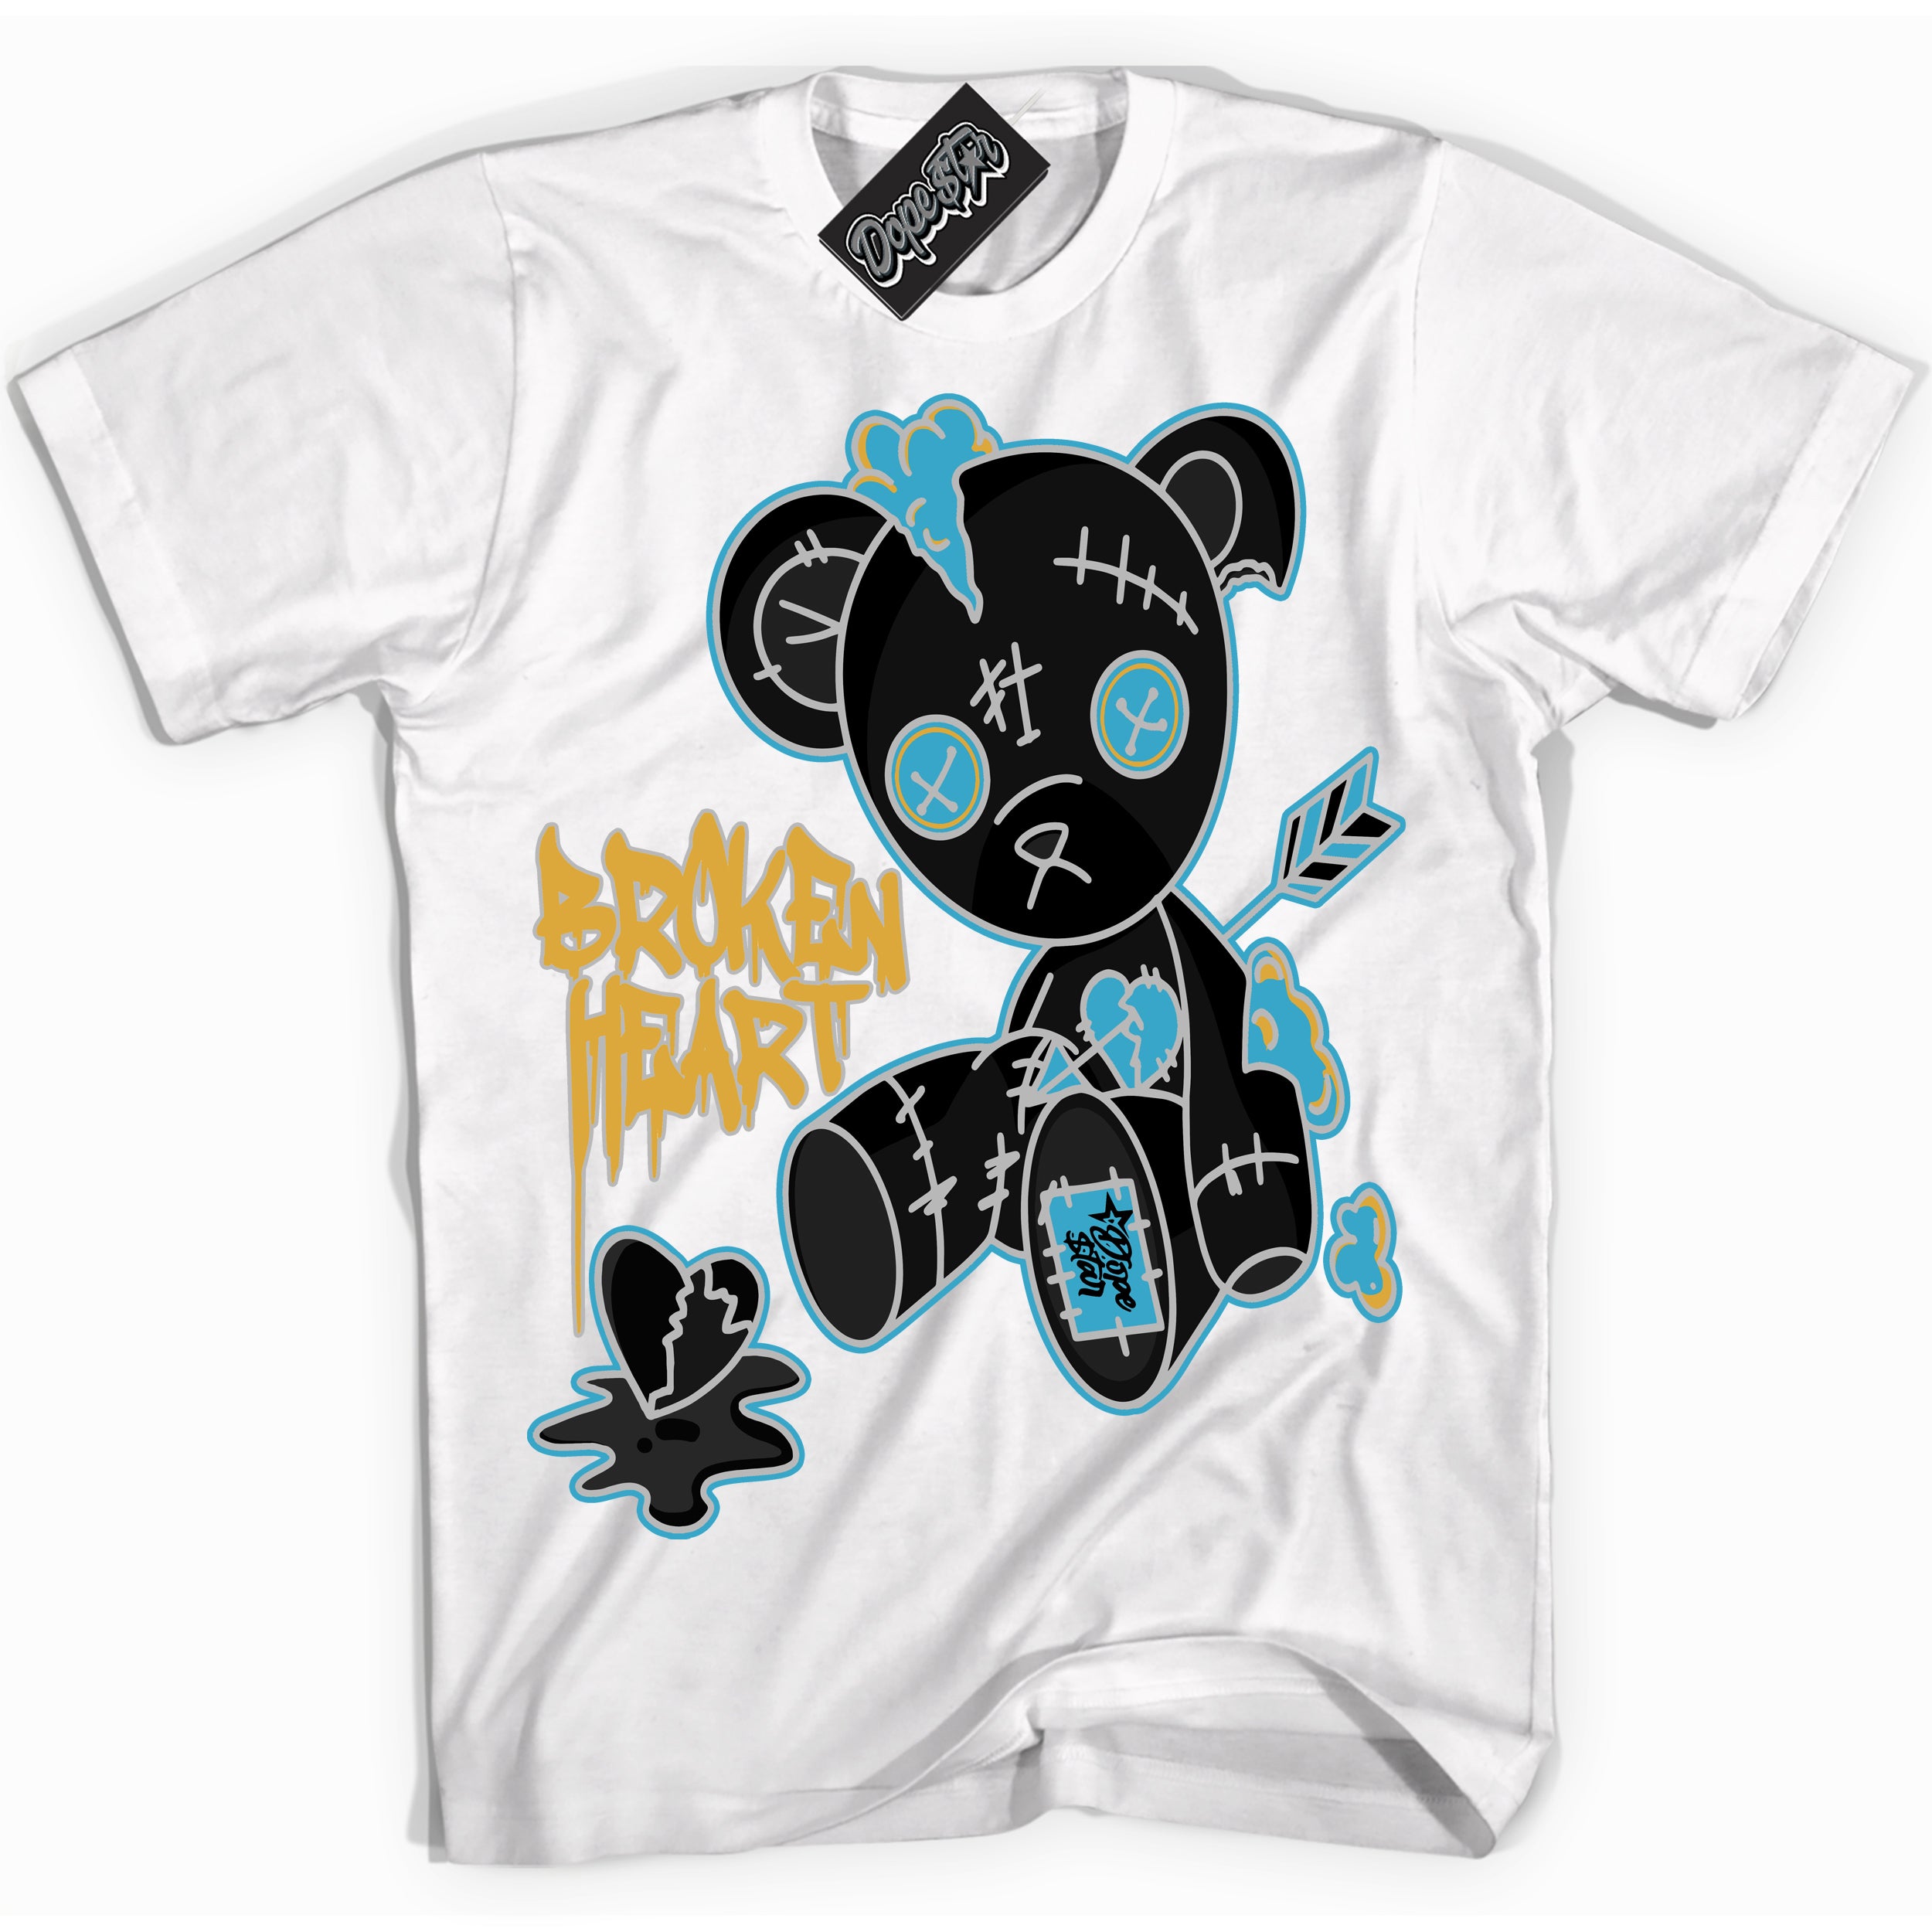 Cool White Shirt with “ Broken Heart Bear” design that perfectly matches Aqua 5s Sneakers.